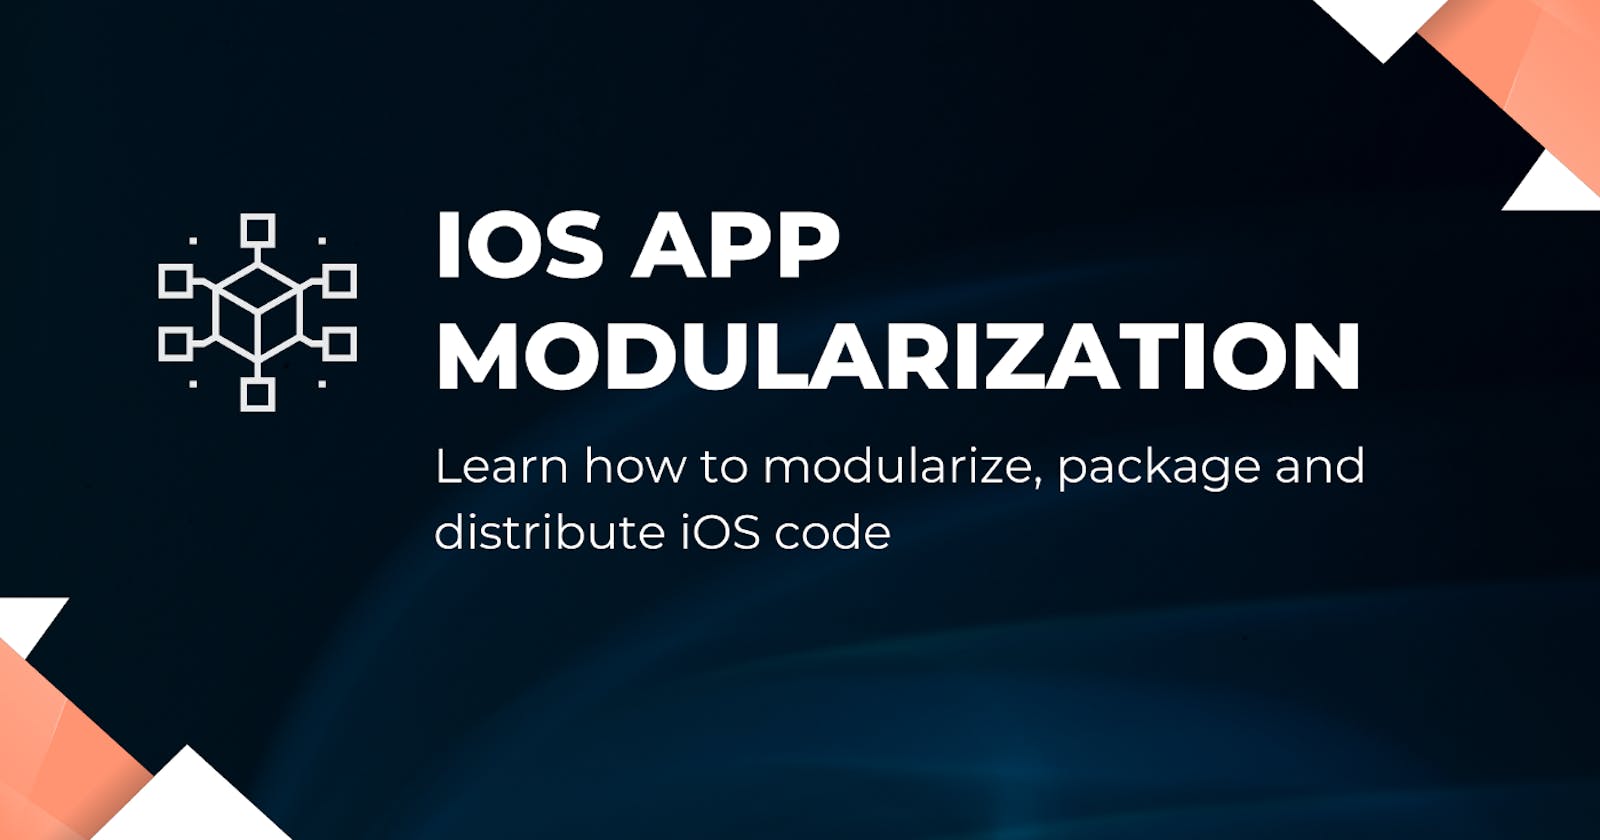 Getting started with iOS Application Modularization